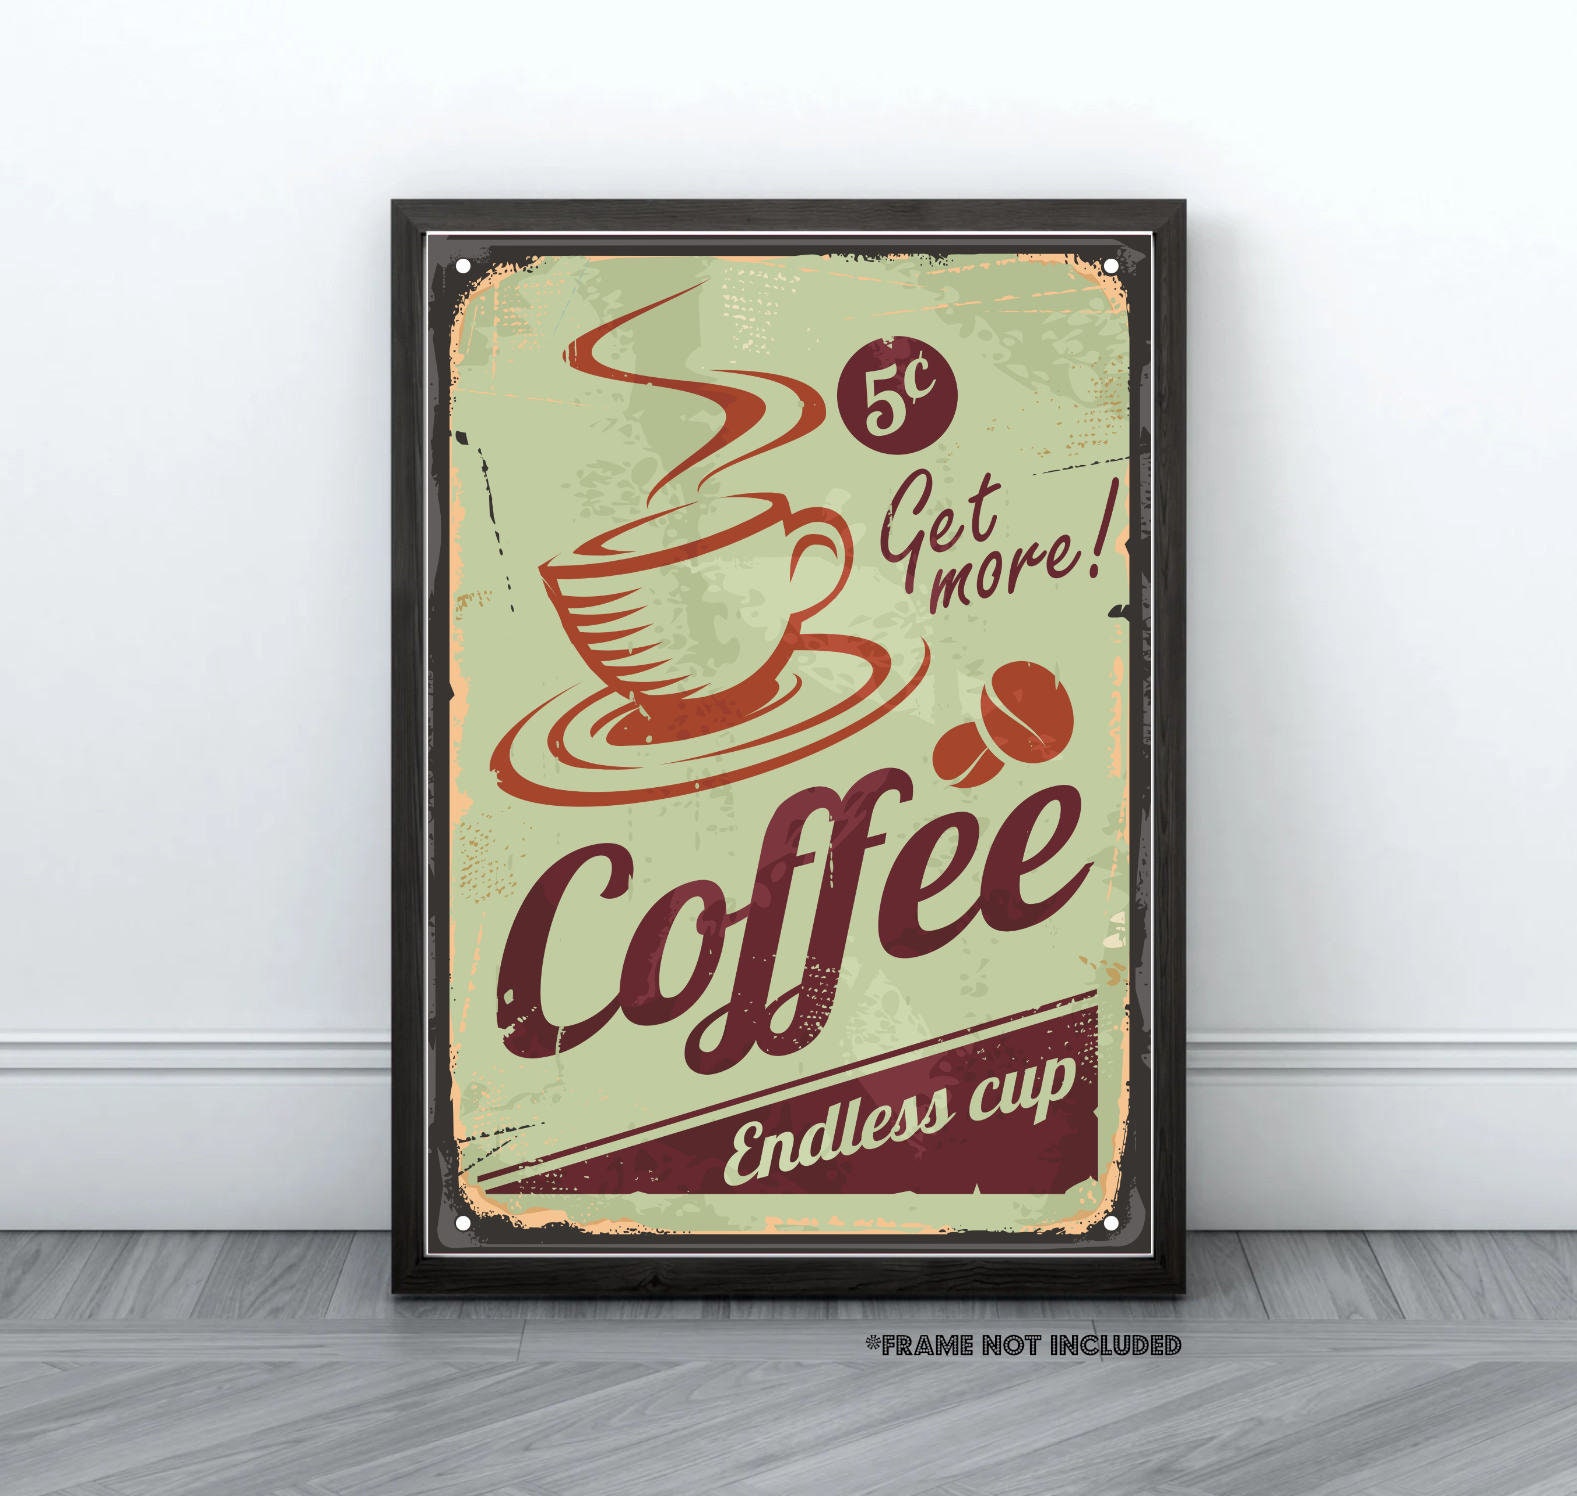 Extra Large Iced Coffee Lover Coffee Cup Typography Poster for Sale by  Retrospacetive Design